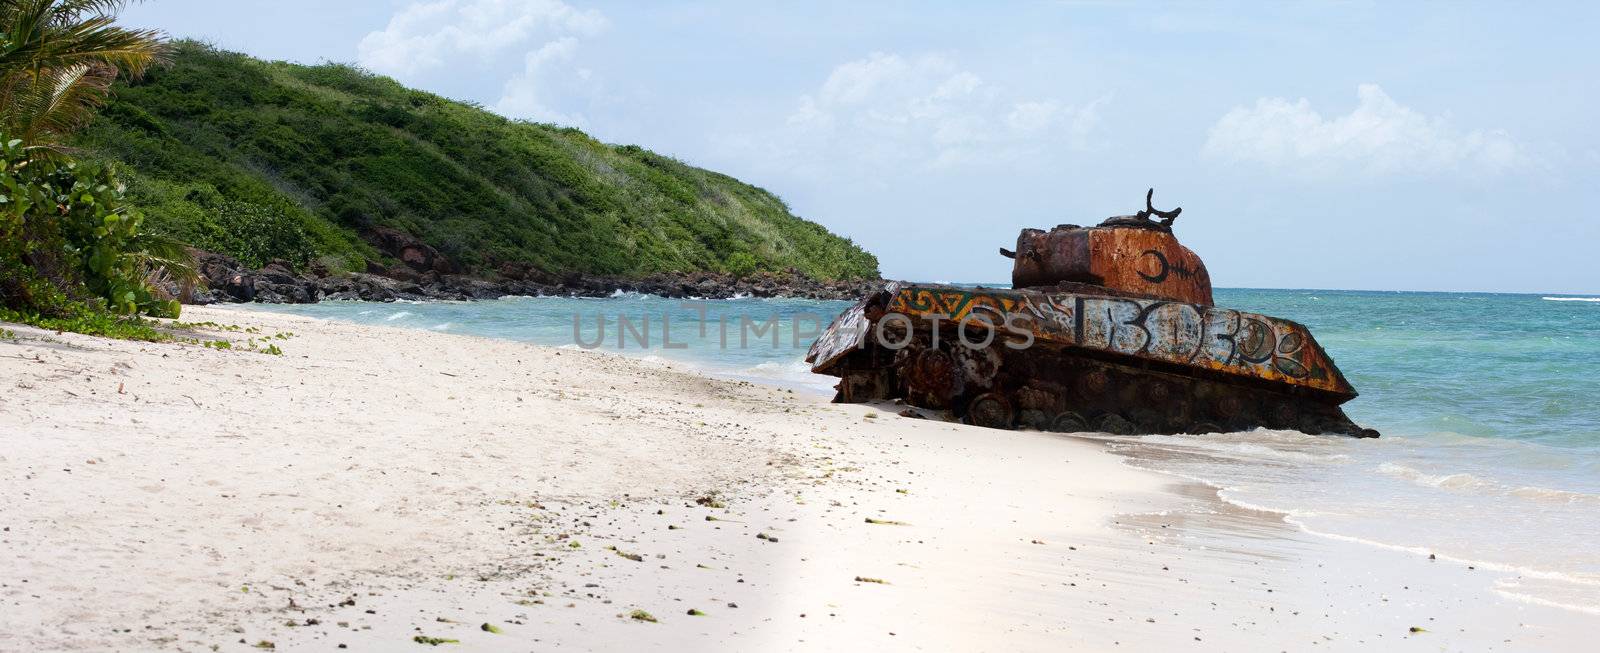 An old rusted and deserted army tank of Flamenco beach on the Puerto Rican island of Culebra. Paradise lost.